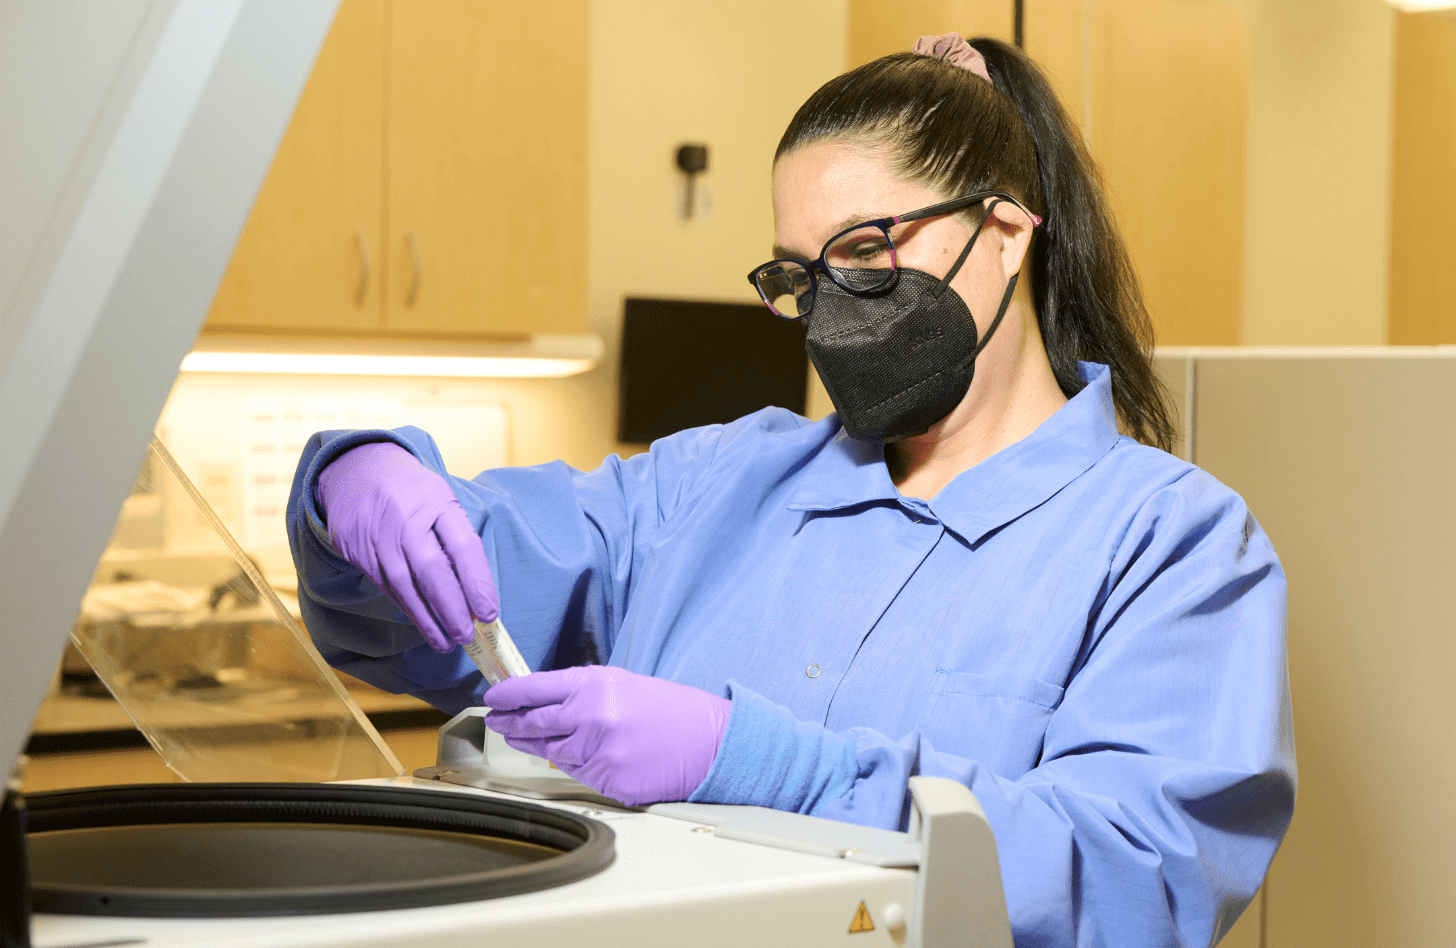 Jennifer M. working in the lab at Mid-America Transplant. She is wearing purple gloves and a black mask.